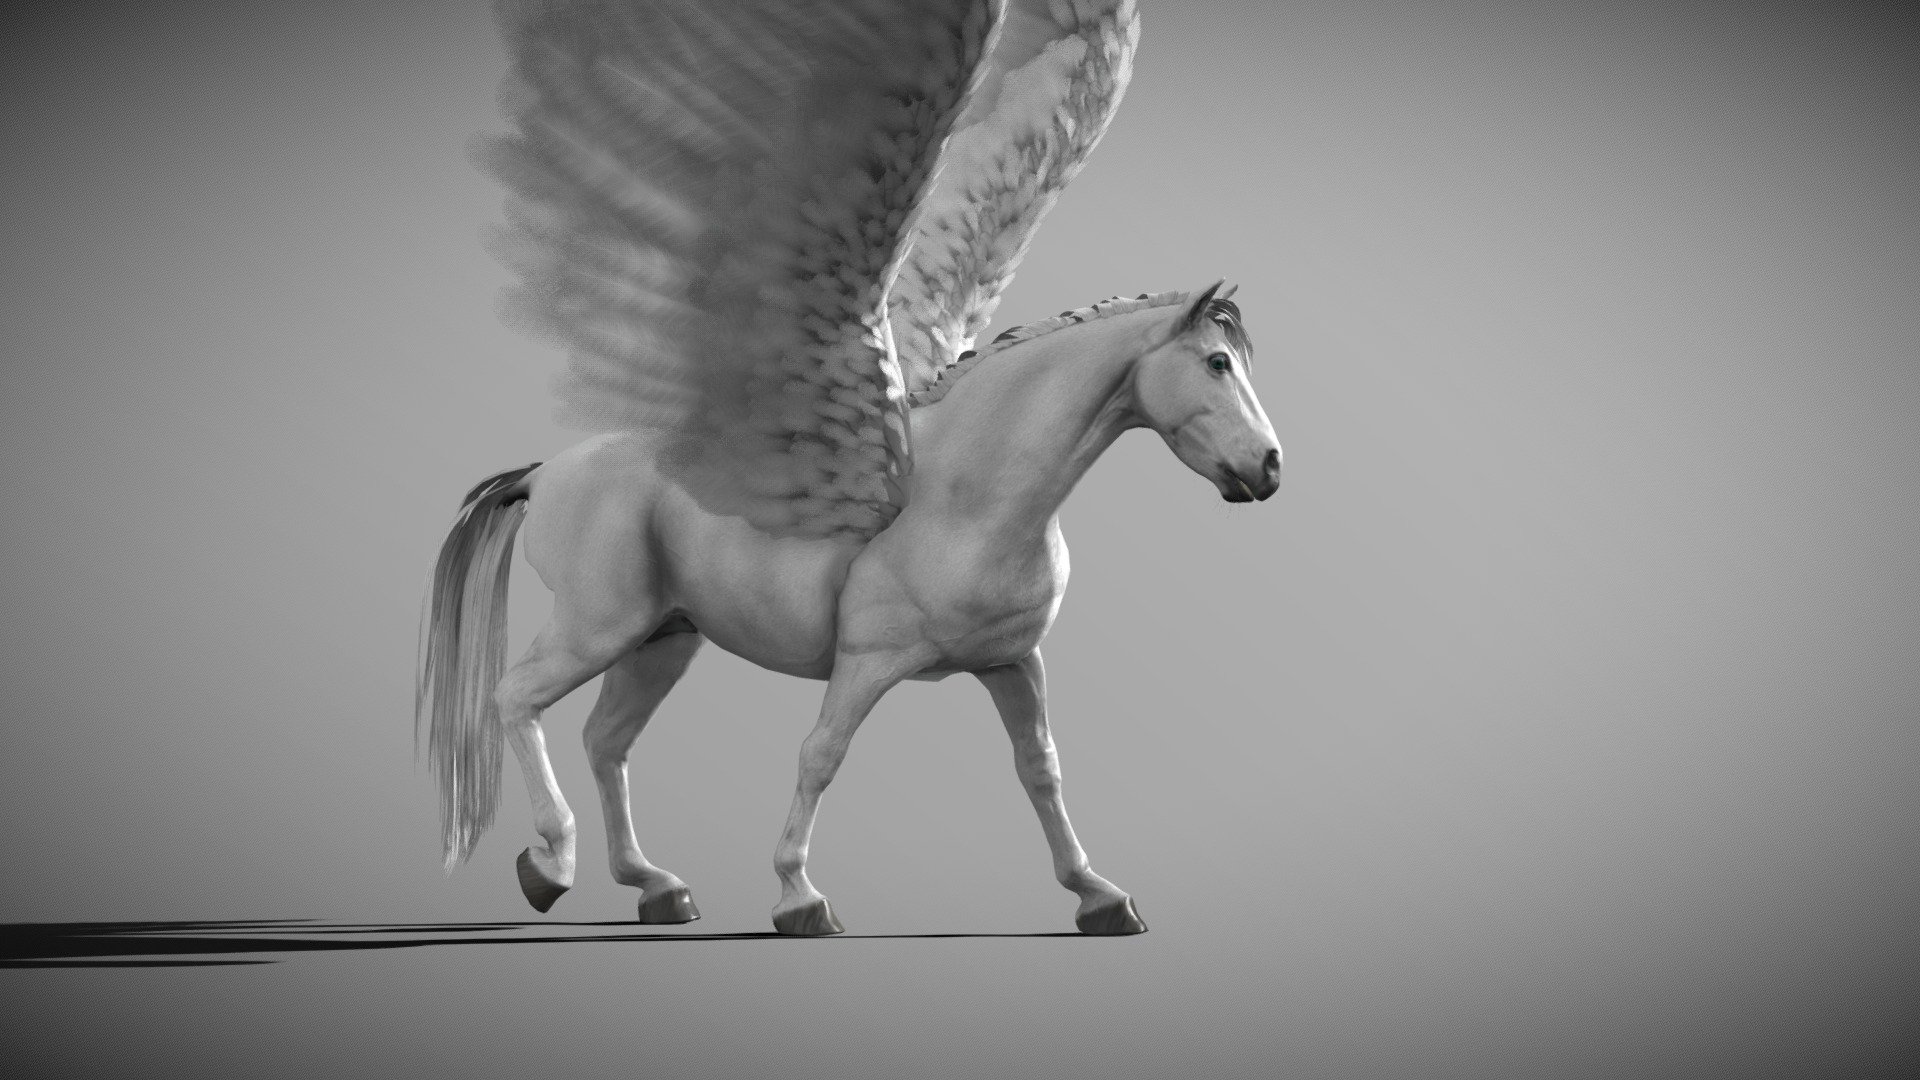 Pegasus, created in Blender, Zbrush Core and Substance Painter original blender file in the Zip folder uploaded!

In the zip folder there is the original Blender file the Unreal Engine 5 import with all material set up

Textures 4096x4096:* - body: albedo, roughness, Ambient occlusion, normal, - eyes and teeth: albedo, roughness, Ambient occlusion, normal, opacity - mane, feathers and tail: color node, normal and opacity

Pegasus is a winged horse in Greek mythology, usually depicted as a white stallion. He was sired by Poseidon, in his role as horse-god, and foaled by the Gorgon Medusa. Pegasus was the brother of Chrysaor, both born when their mother was decapitated by Perseus. Greco-Roman poets wrote about his ascent to heaven after his birth and his obeisance to Zeus, who instructed him to bring lightning and thunder from Olympus 3d model